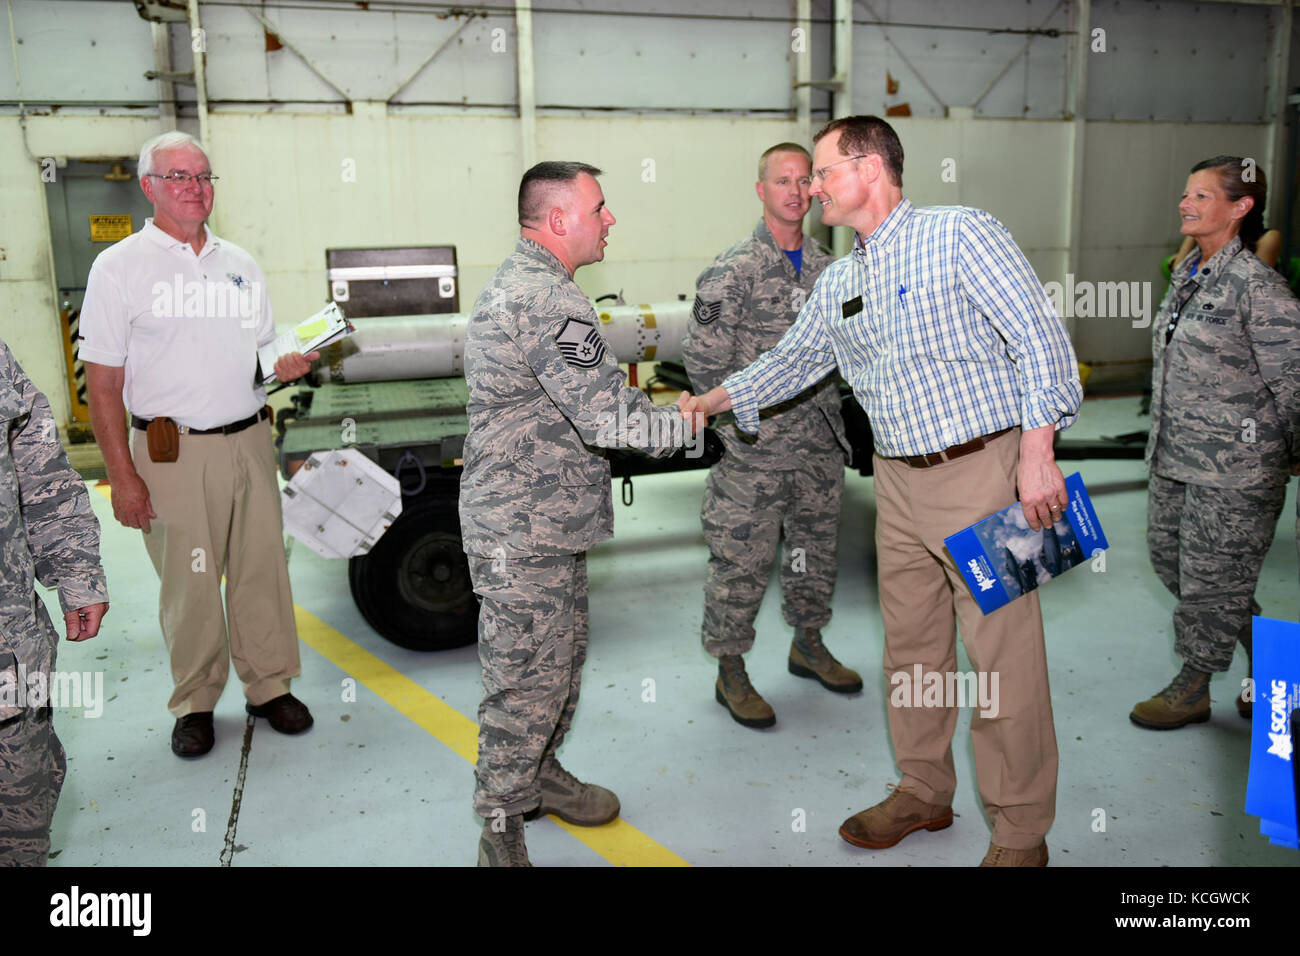 South Carolina Lieutenant Governor Kevin L. Bryant greets U.S. Air Force Master Sgt. John Bonovich, an avionics technician with the 169th Aircraft Maintenance Squadron, during his visit to McEntire Joint National Guard Base, July 21, 2017. Lt. Governor Bryant spoke with South Carolina Air and Army National Guard leadership about base missions and received a windshield tour of the installation with orientations of the various aircraft operated by South Carolina National Guard Airmen and Soldiers.  (U.S. Air National Guard photo by Master Sgt. Caycee Watson) Stock Photo